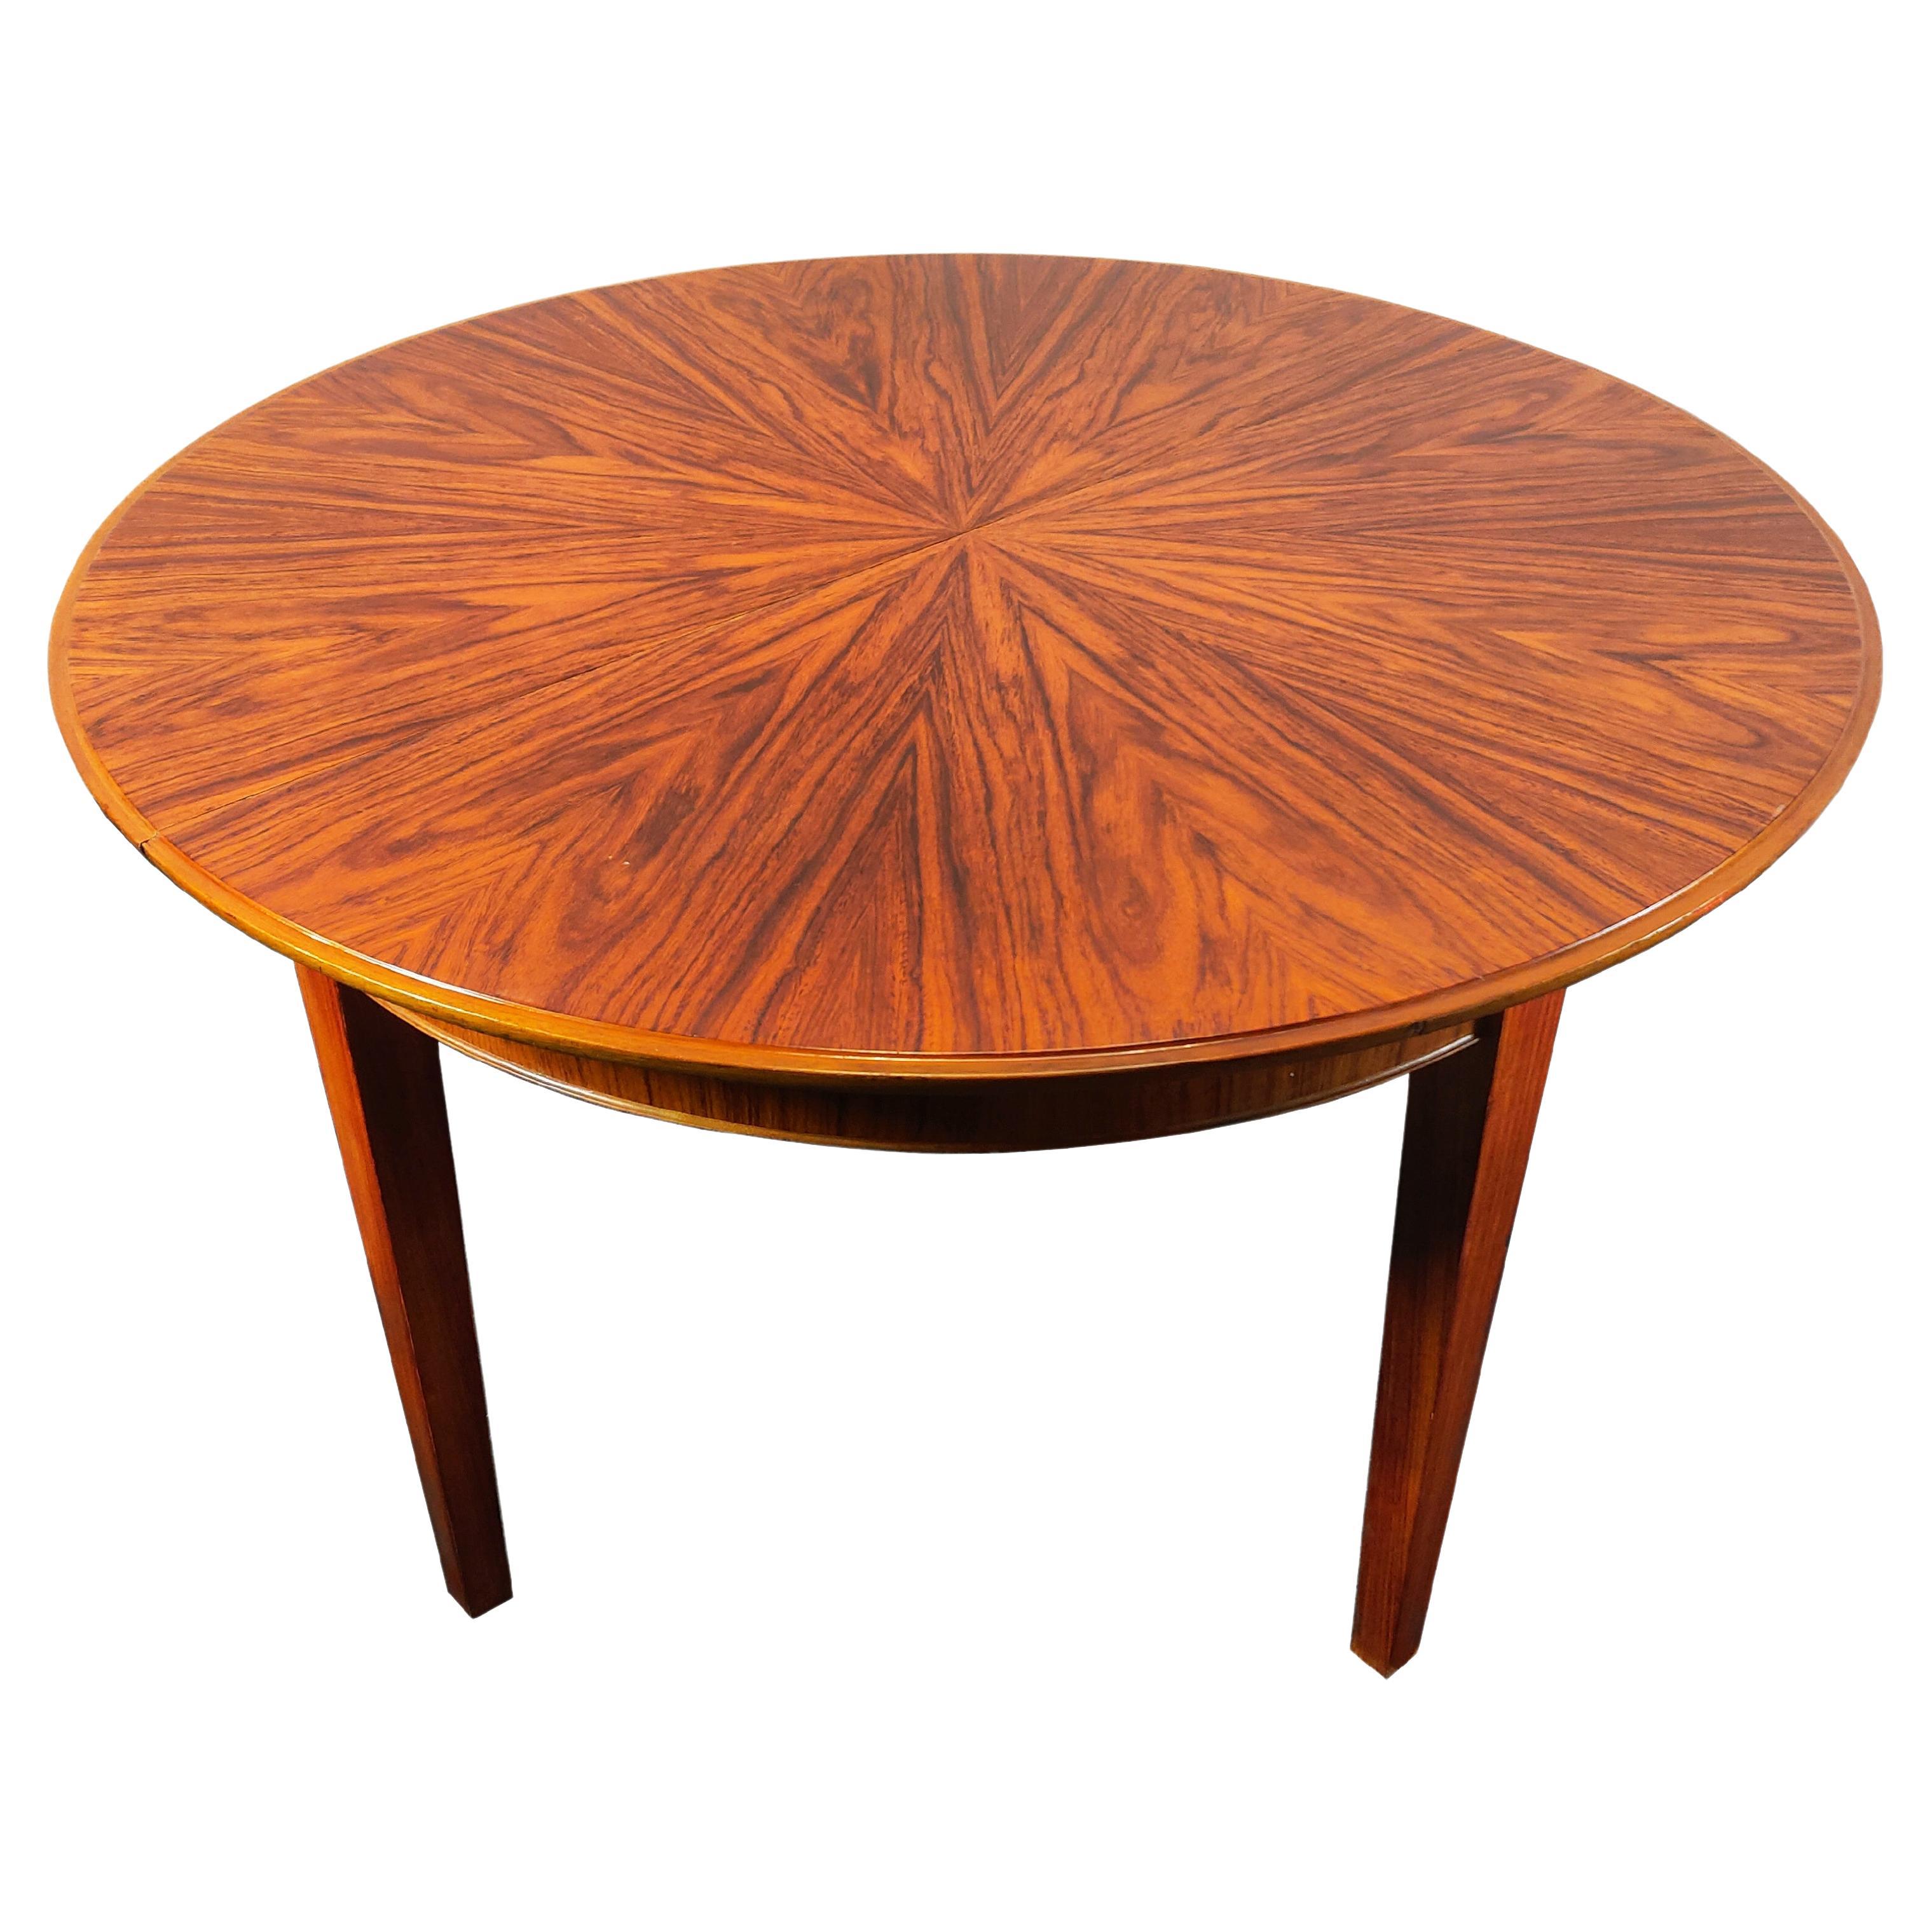 Mid-Century Rosewood Extendable Dining Table, 1960s